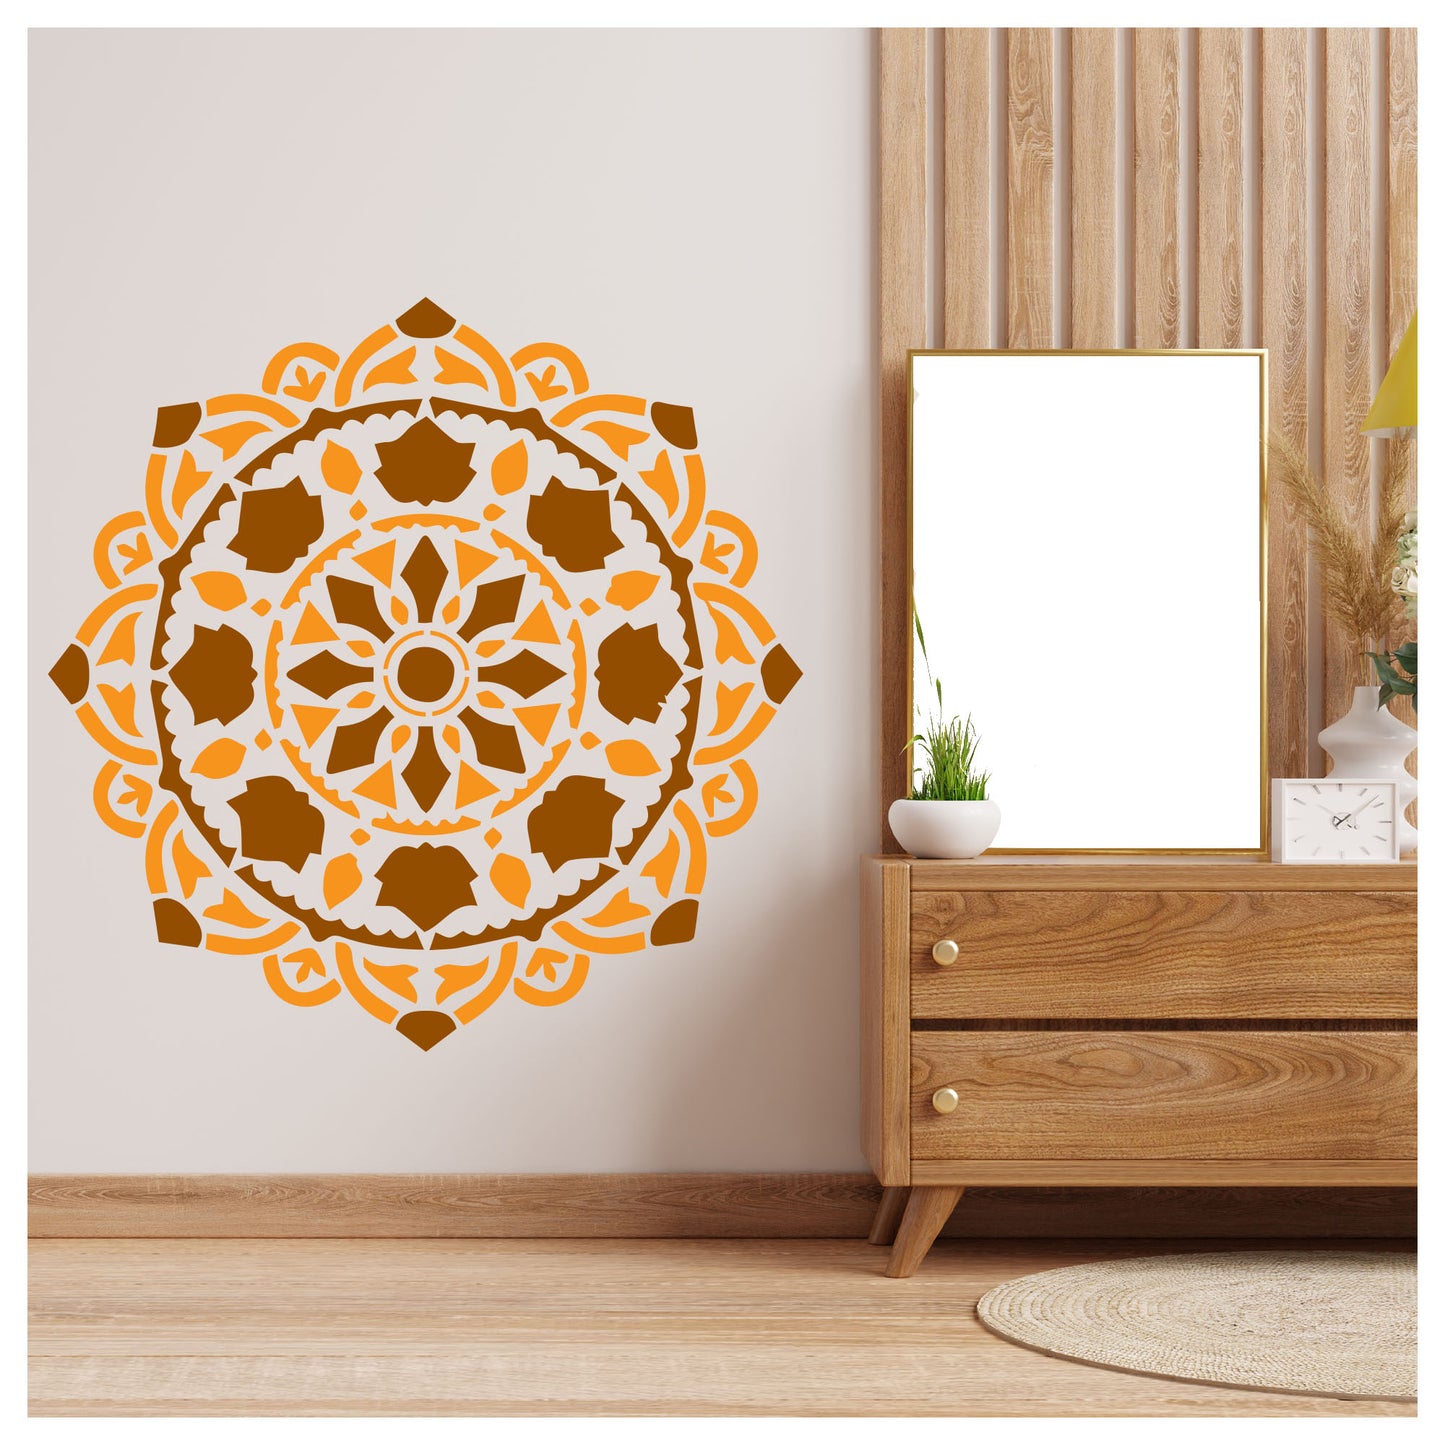 Herbage Mandala Design Stencil for Wall Painting (KDMD1469)